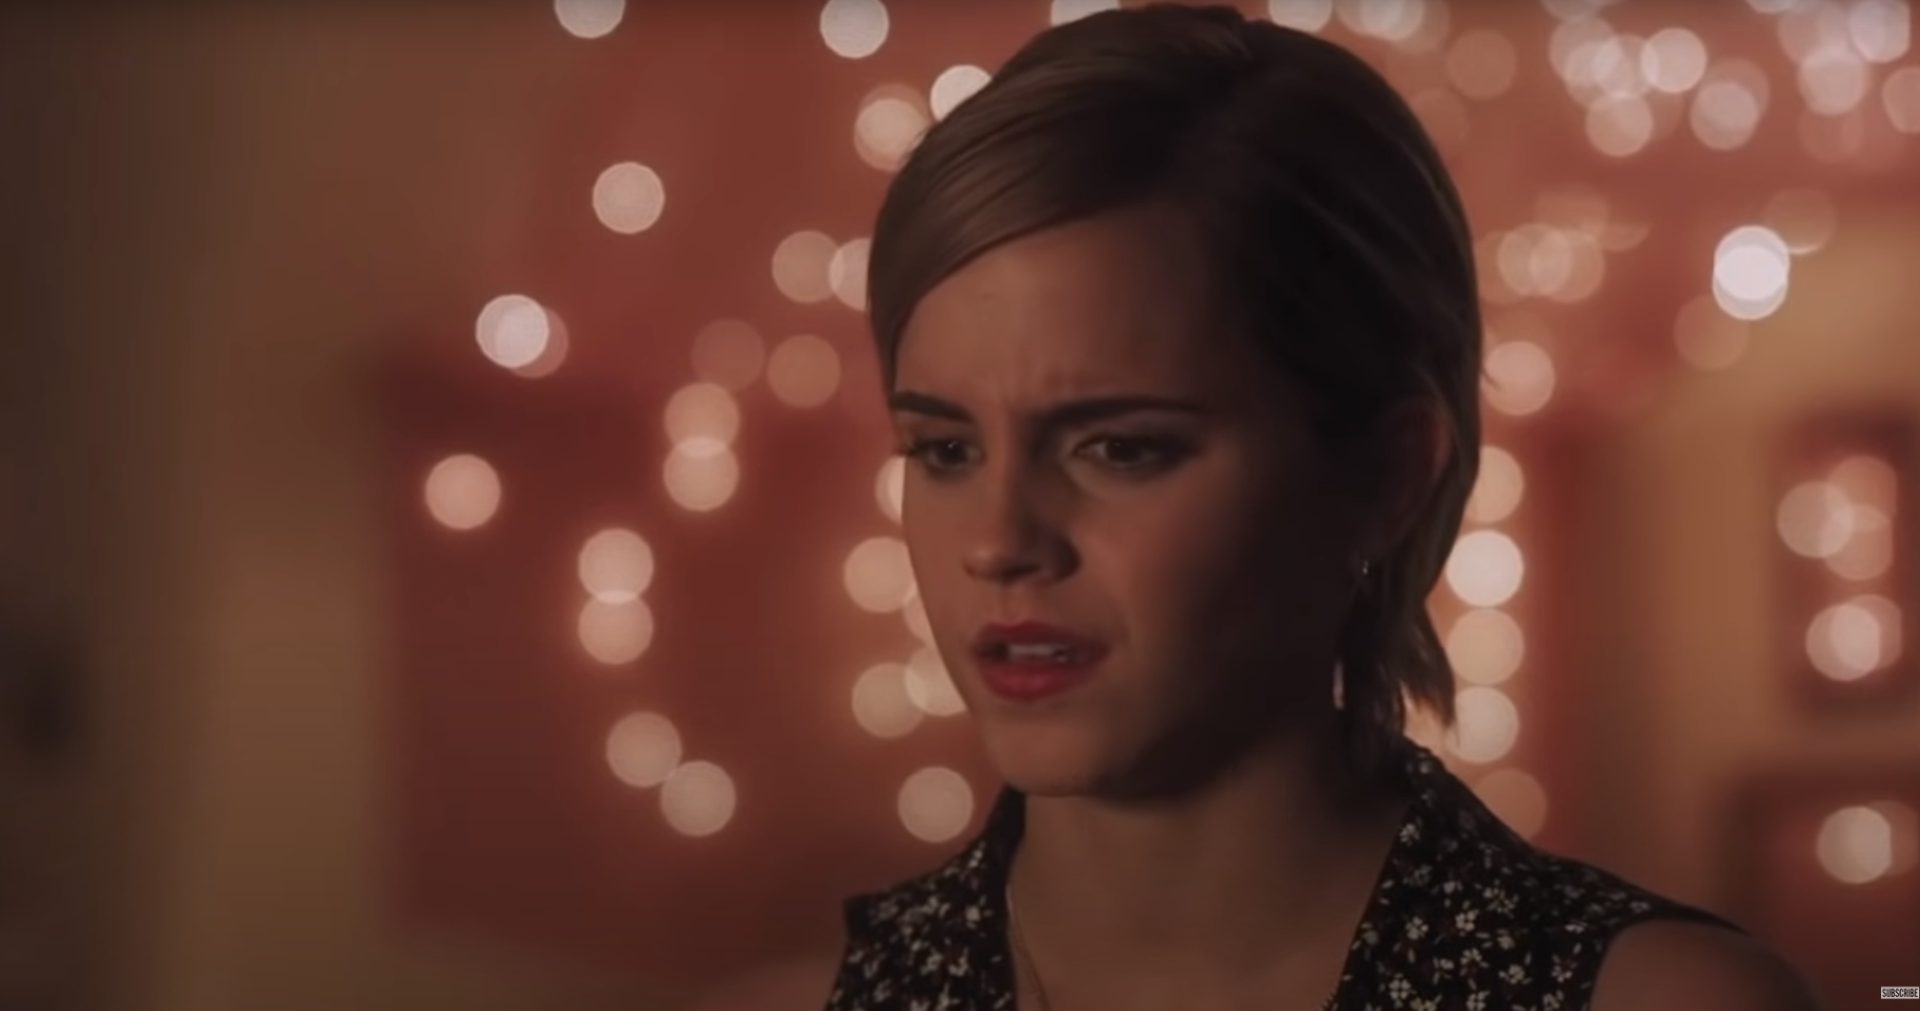 Emma Watson: The Perks of Being a Wallflower